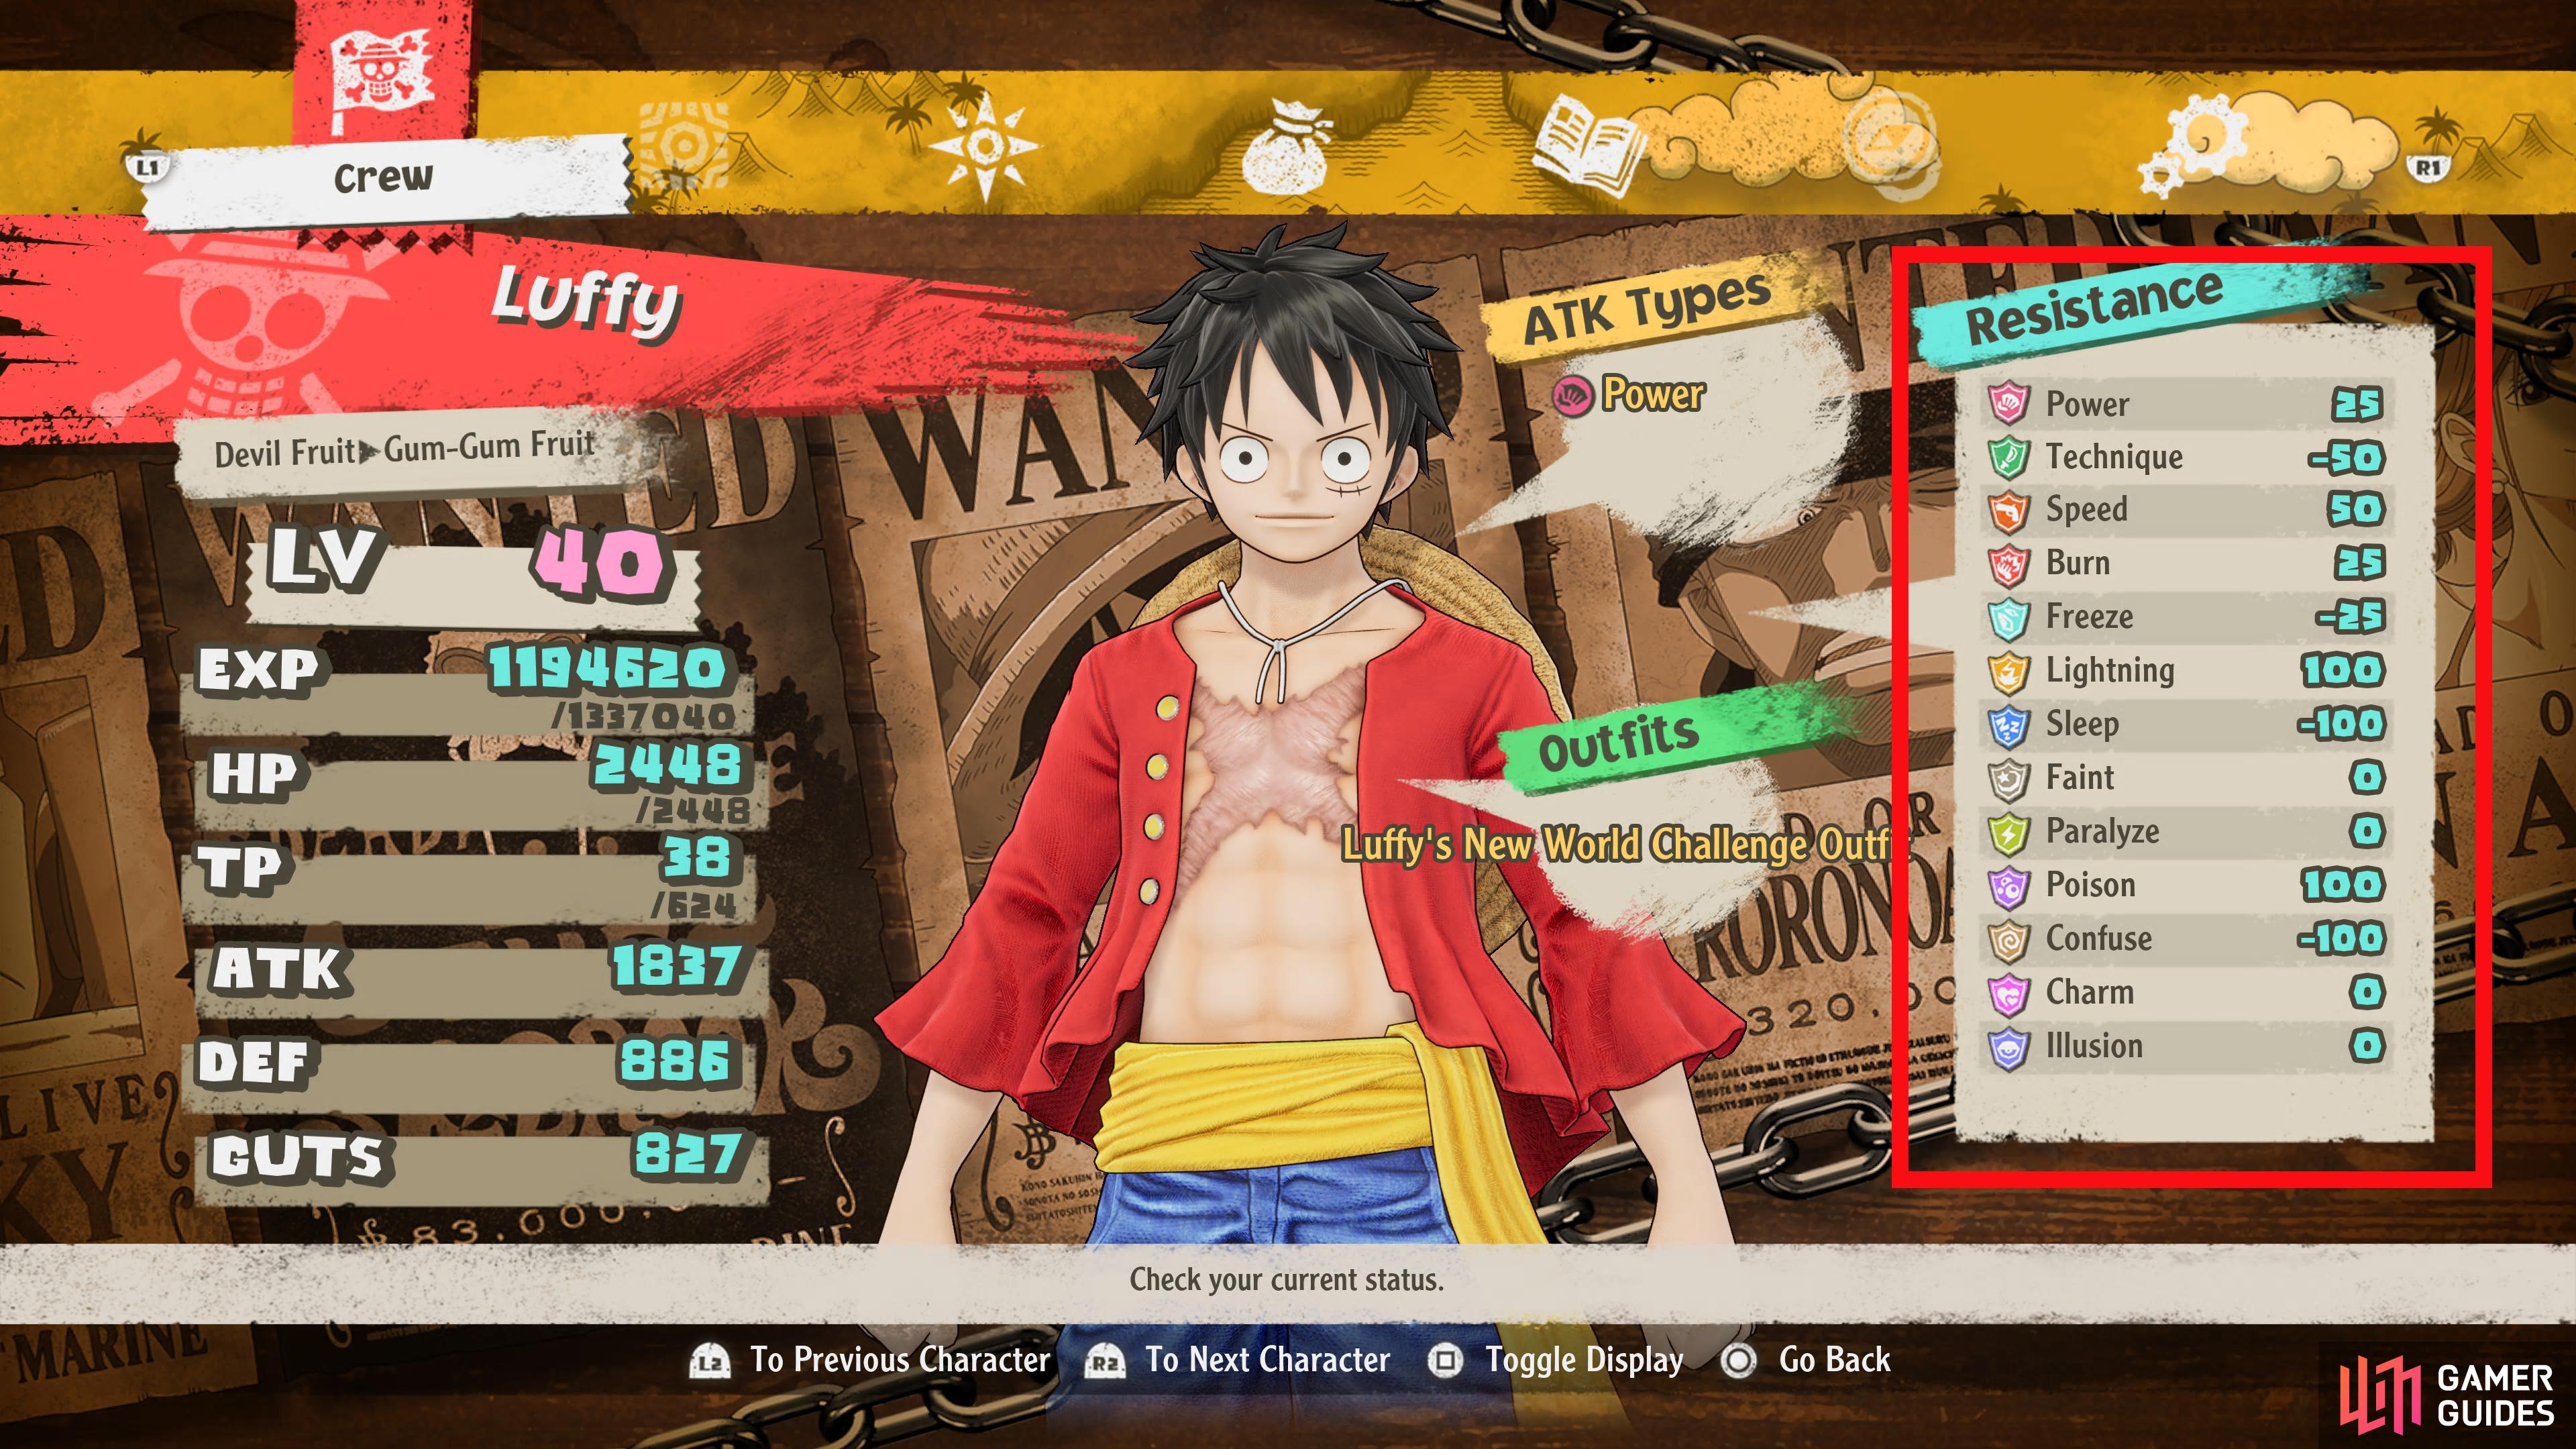 How to change One Piece Odyssey pre- and post-timeskip outfits - Polygon